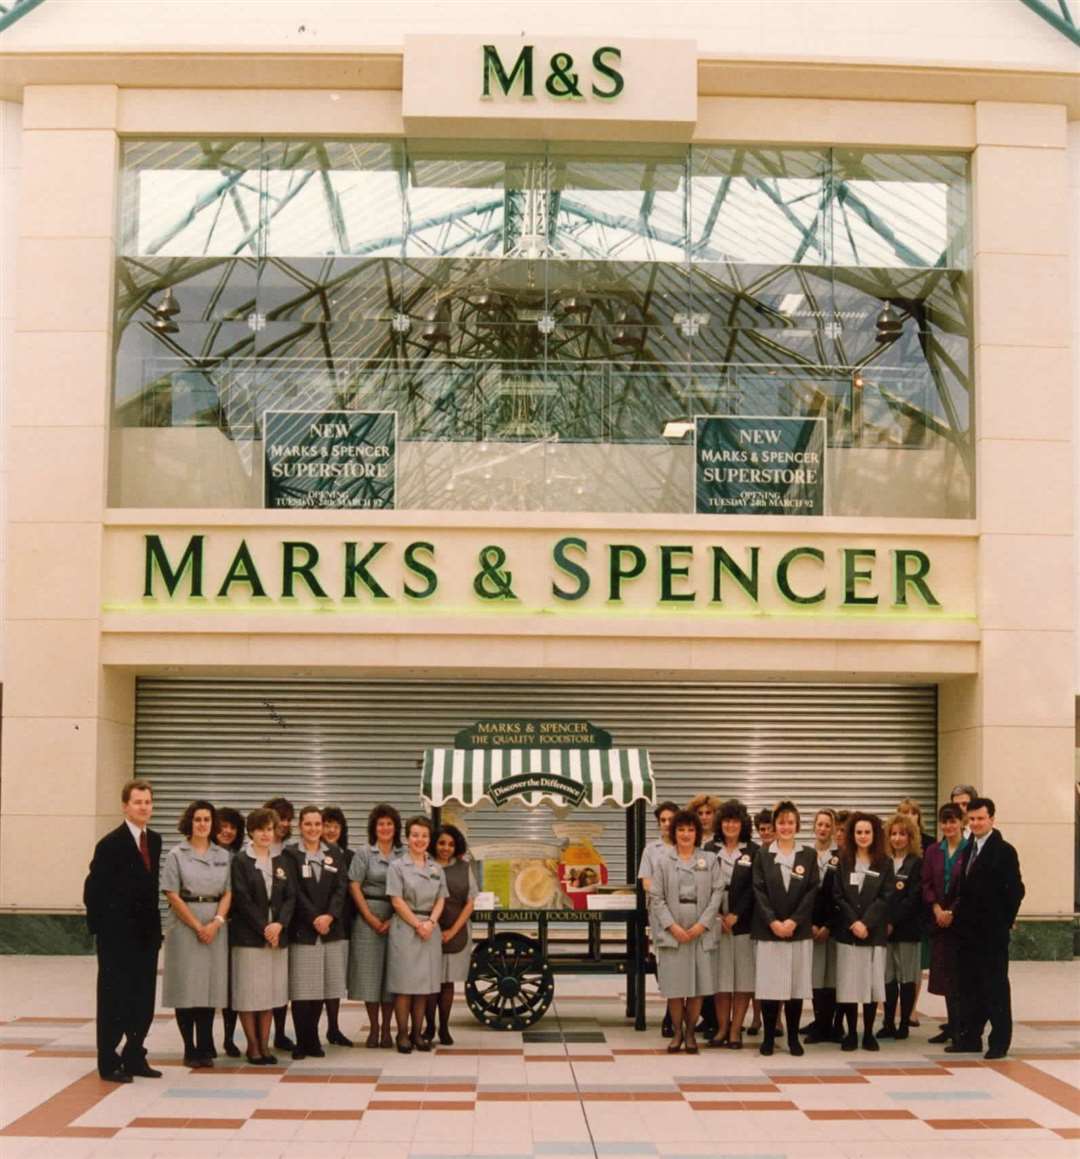 The new Marks and Spencer store all ready to open in March 1992 at Hempstead Valley Shopping Centre, Gillingham